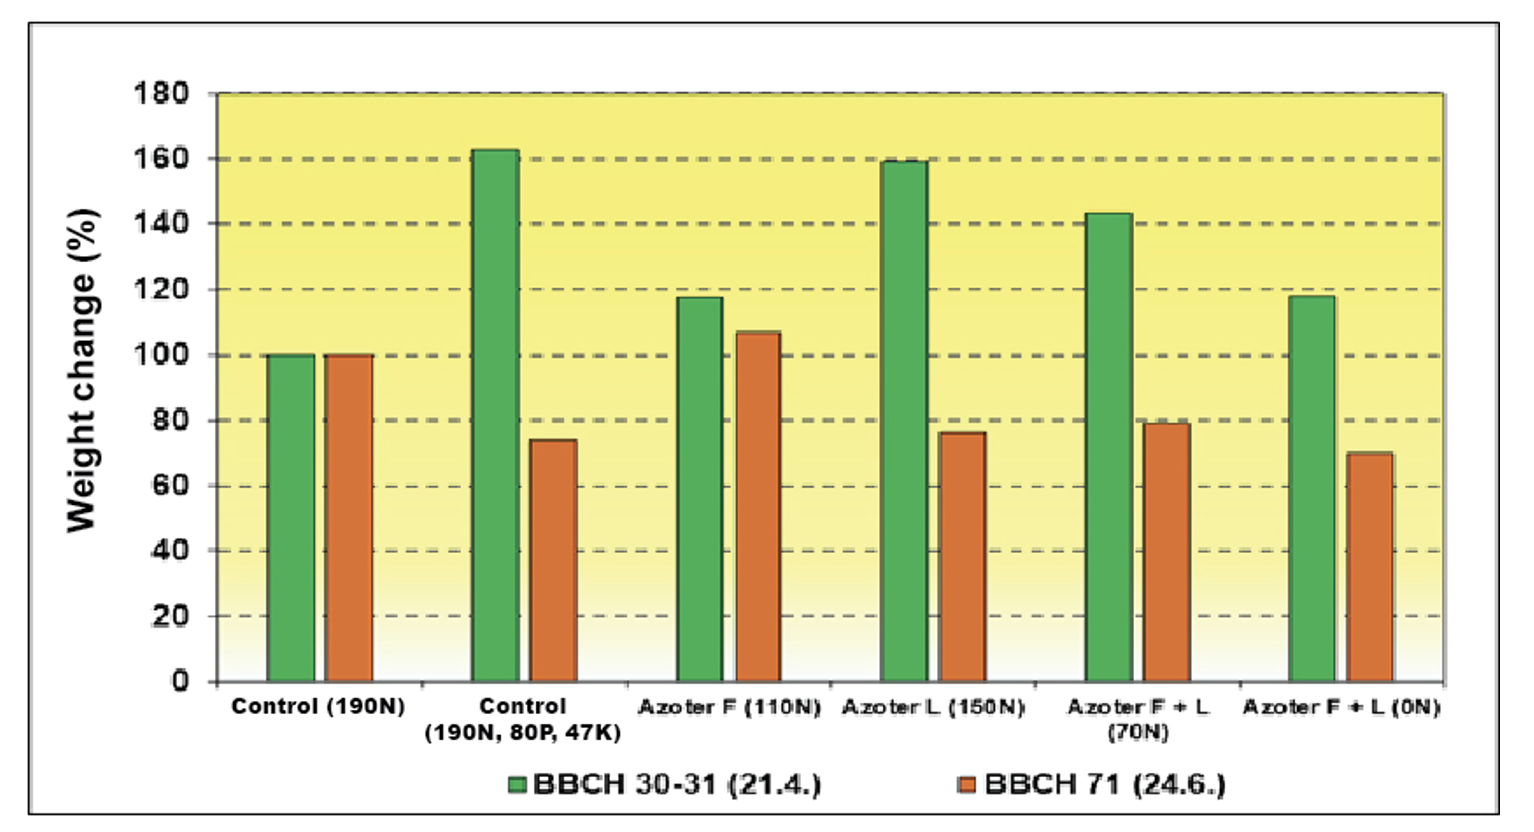 Graph 1. Influence of the application of AZOTER fertilizers on the dry matter weight of aboveground biomass of wheat plants at the beginning of stem elongation BBCH 30 31 and early maturity BBCH 71.